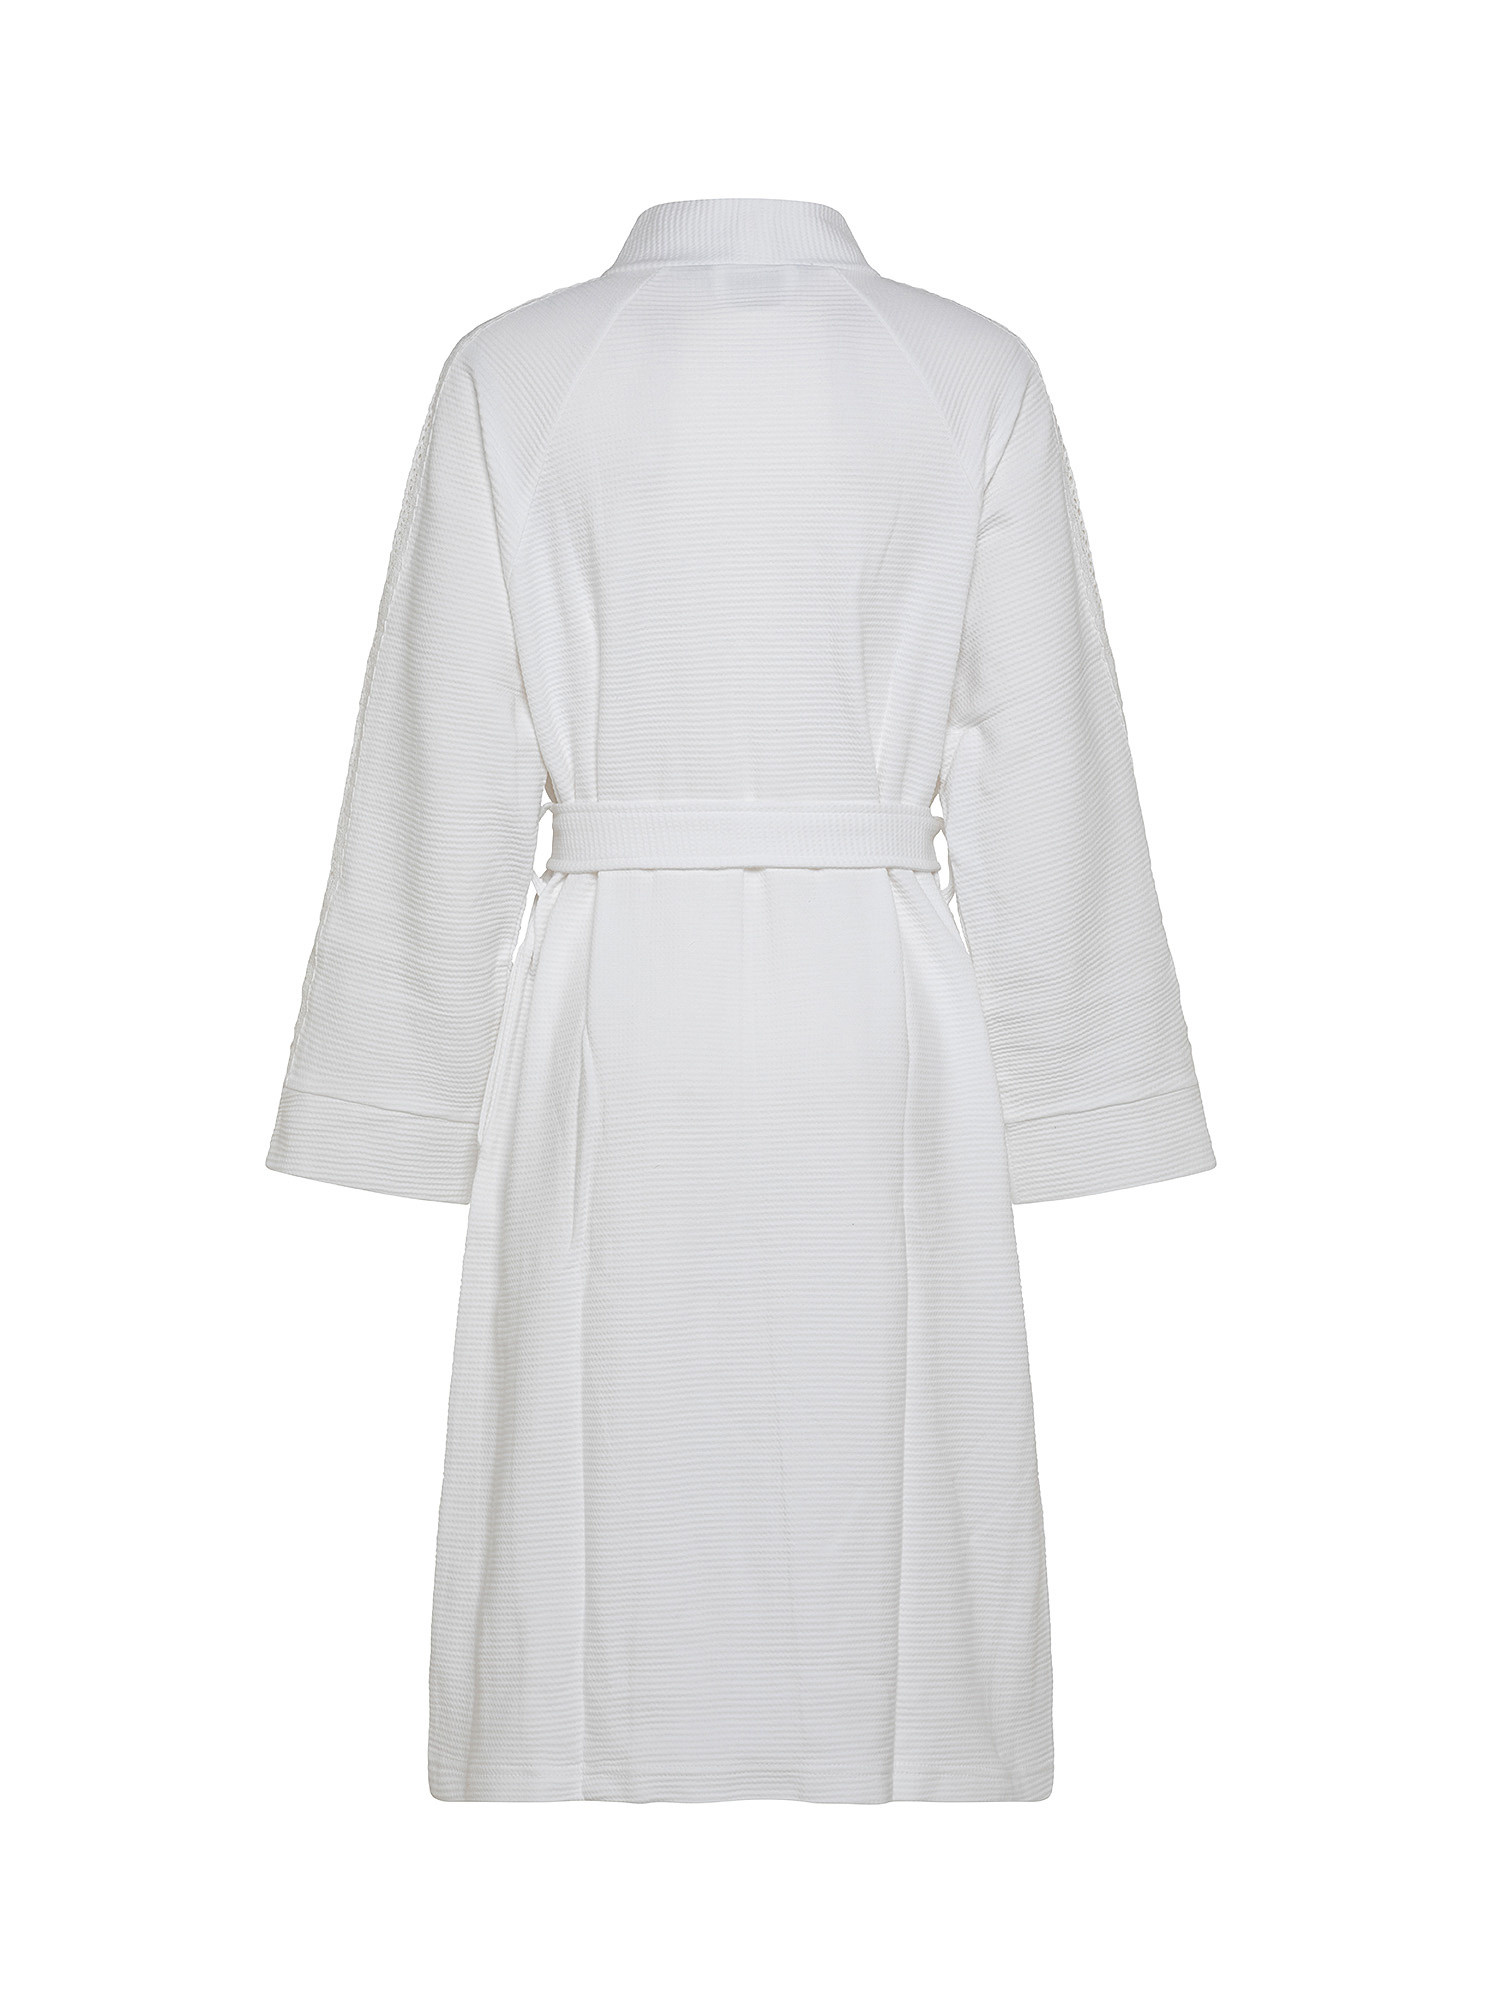 Cotton pique bathrobe with lace inserts, White, large image number 1